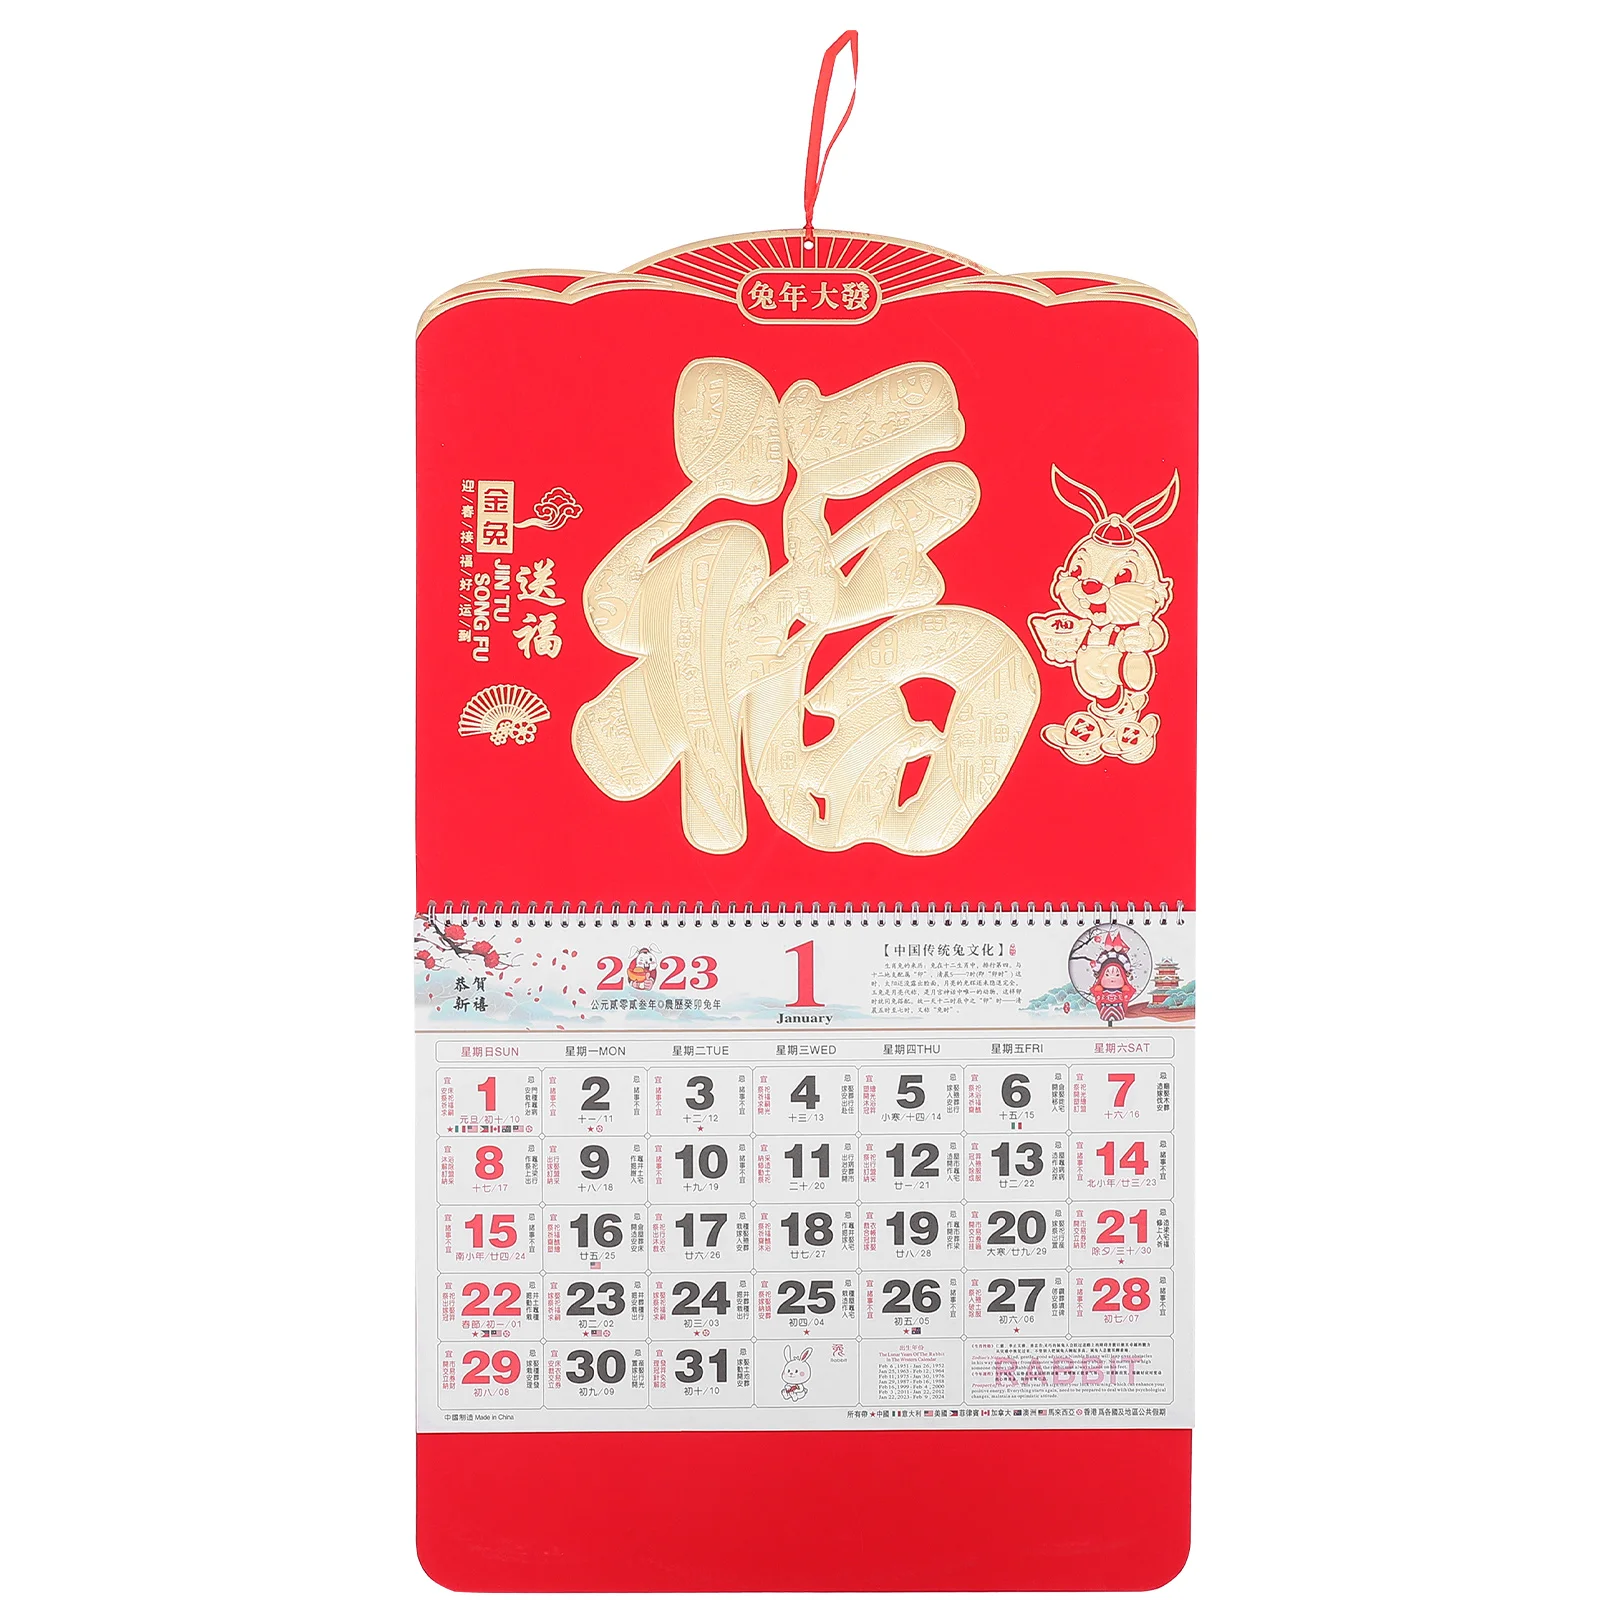 

Calendar Wall Chinese Year Lunar Rabbit Calendars Hanging Traditional Zodiac Daily New Bunny Monthly Years Decor Per Page Day